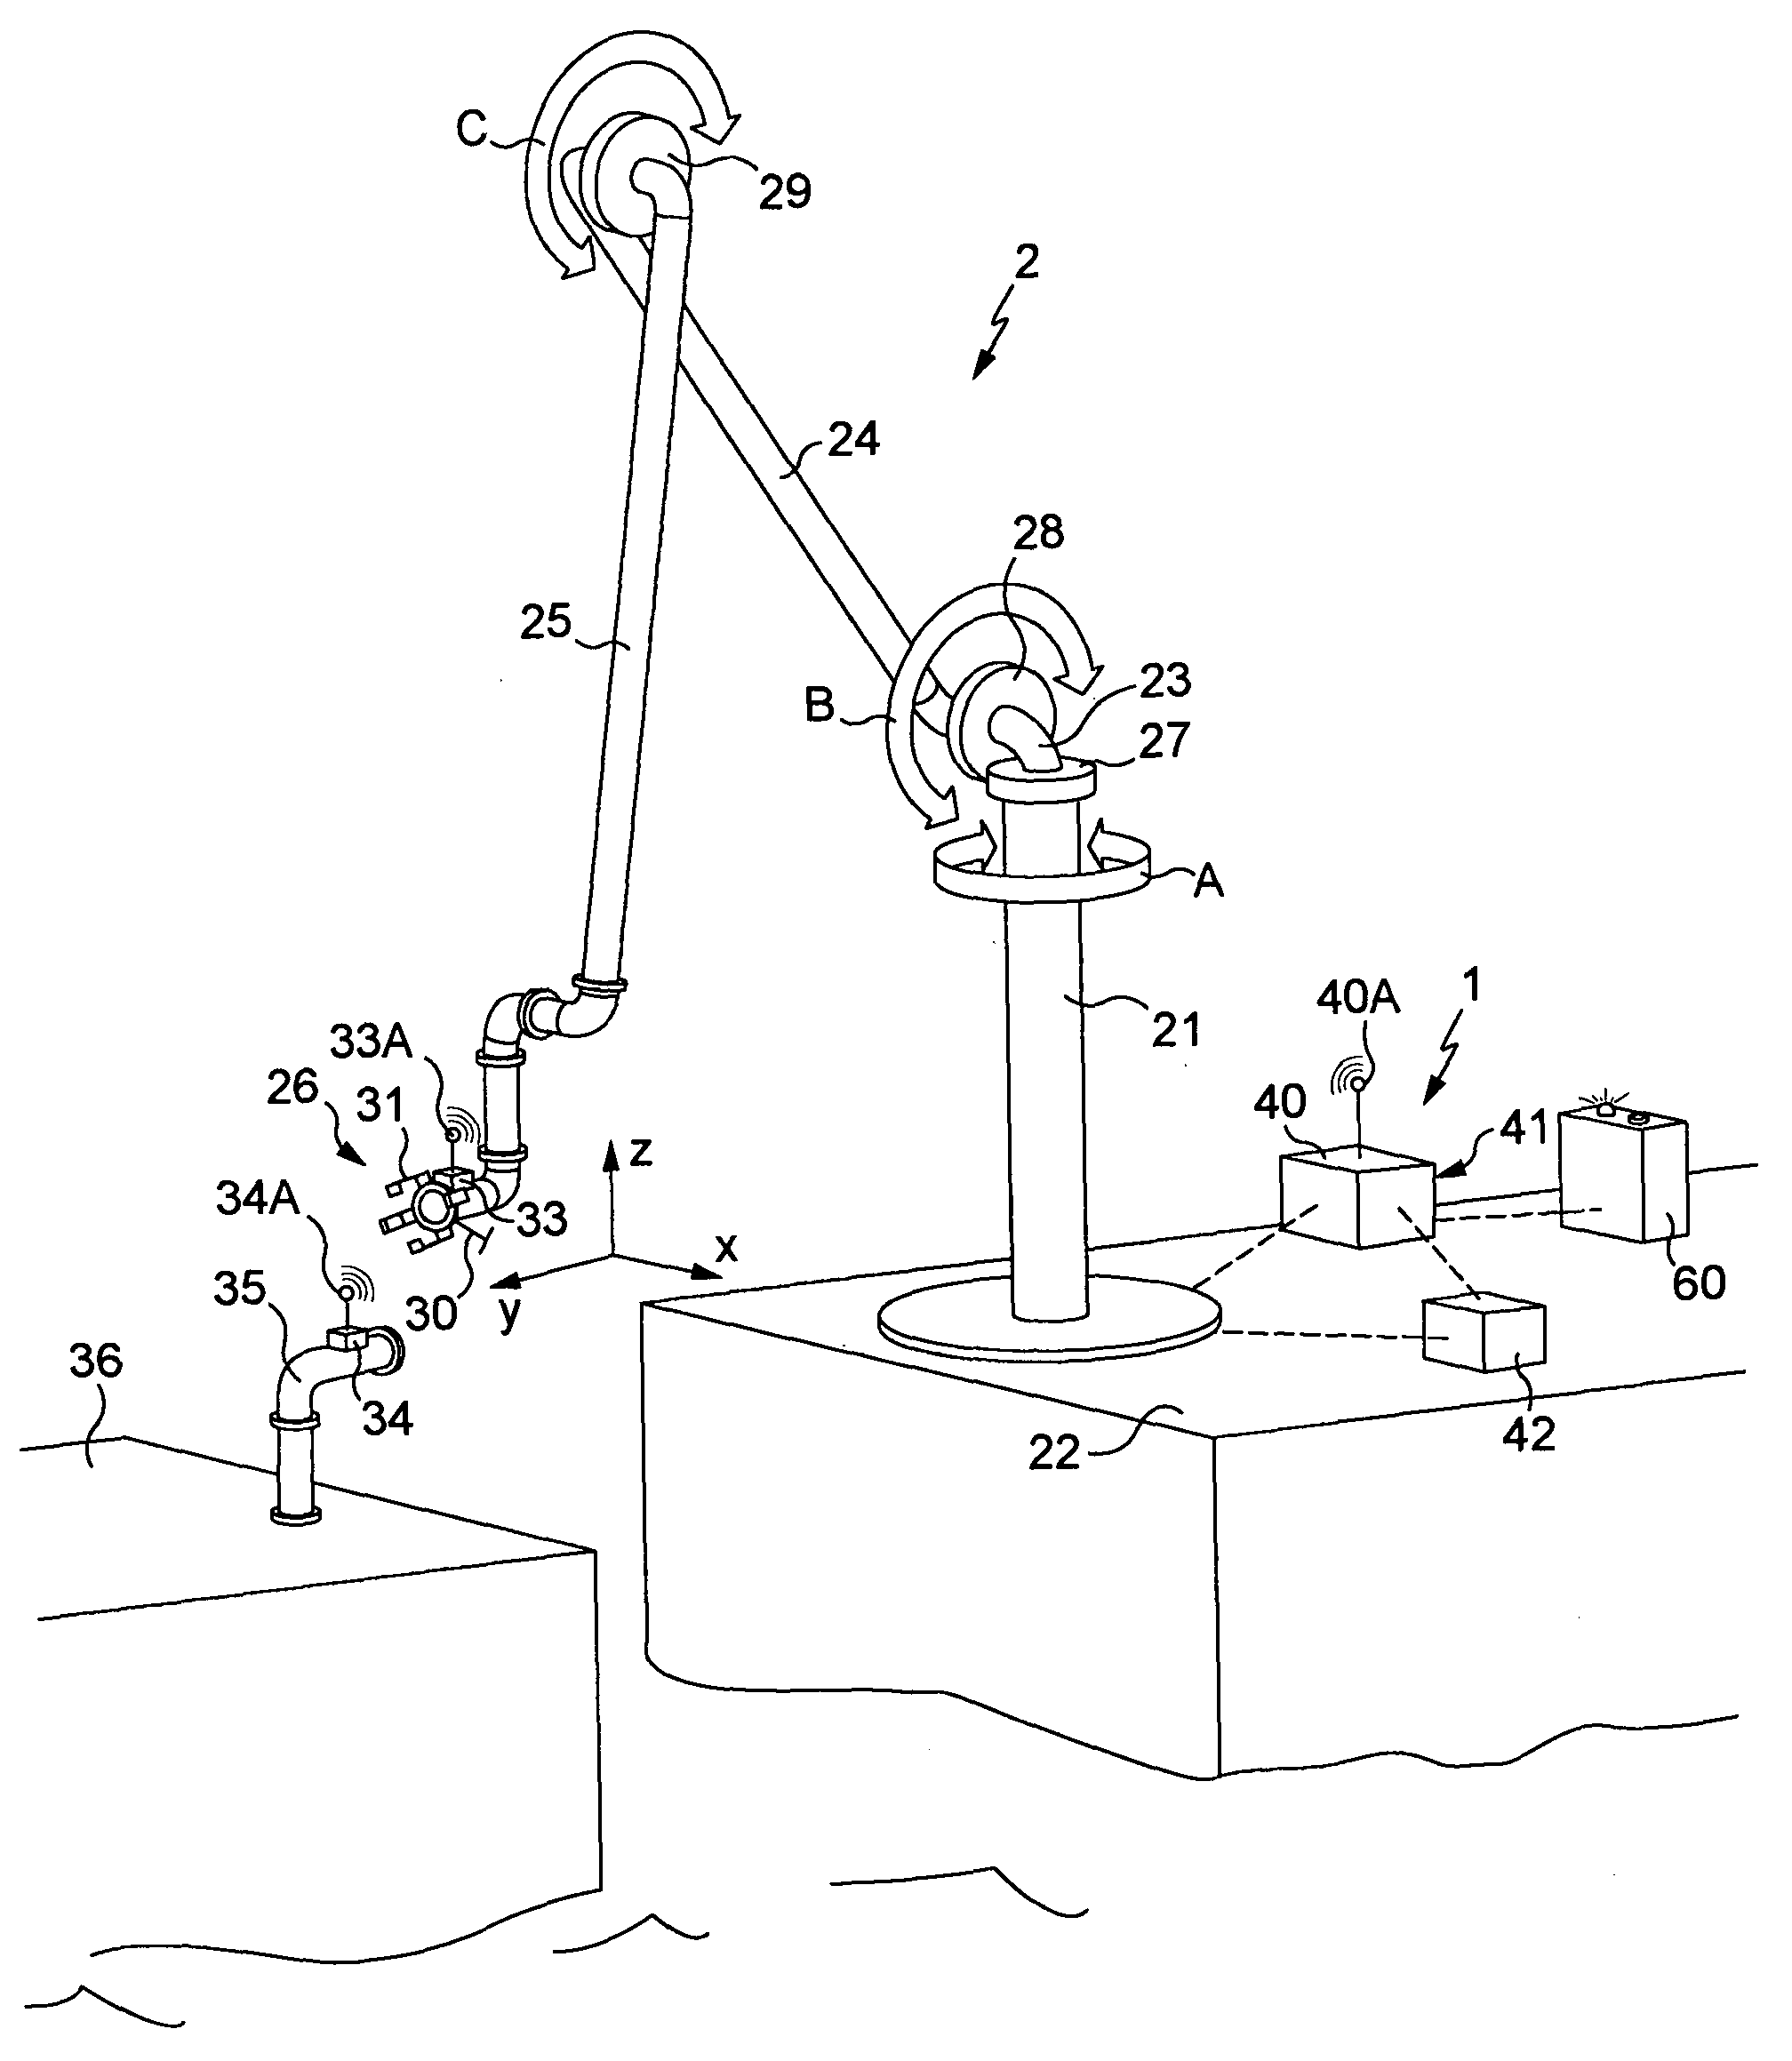 Control device for fluid loading and/or unloading system